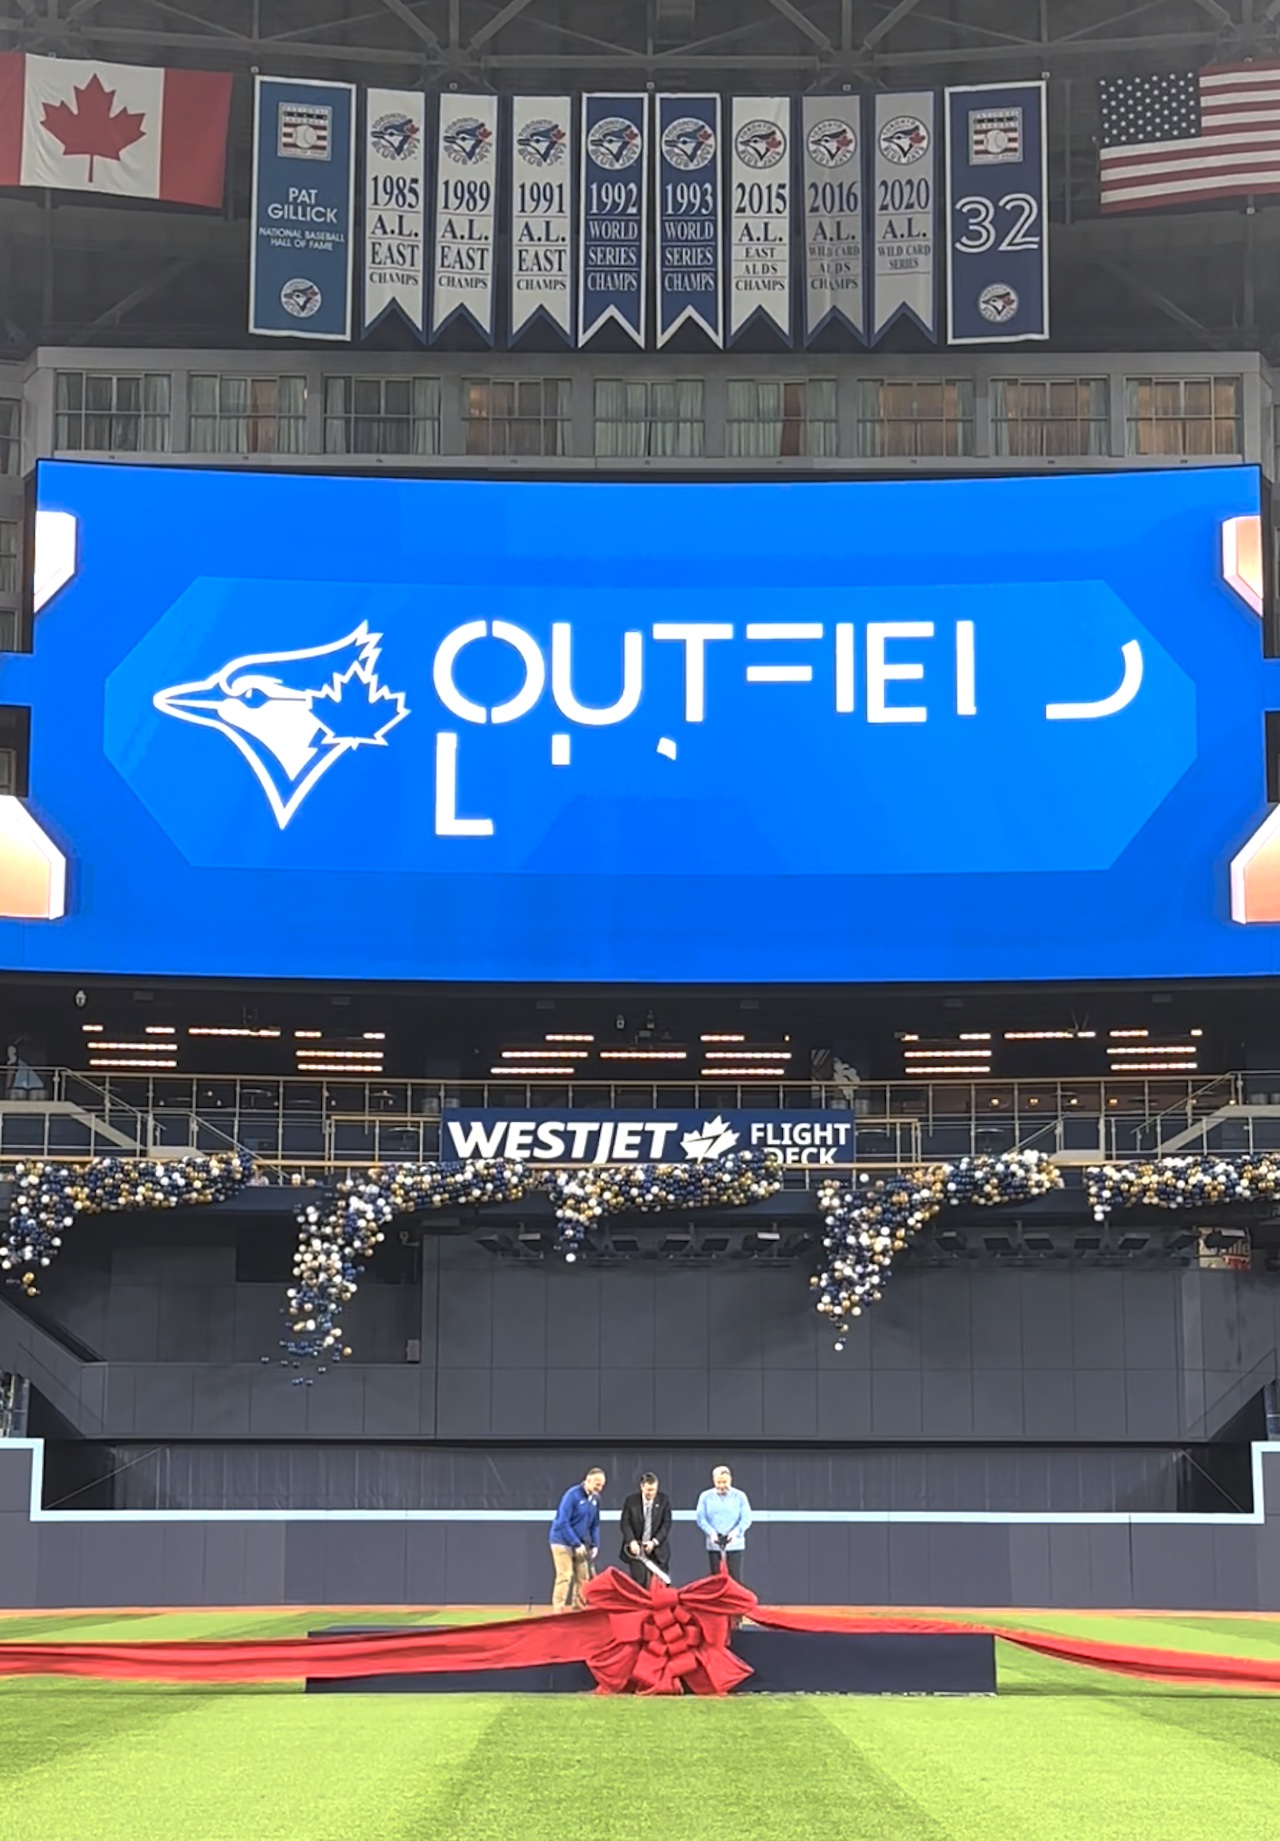 Panelling we did for the new Toronto Blue Jays Store at the Rogers